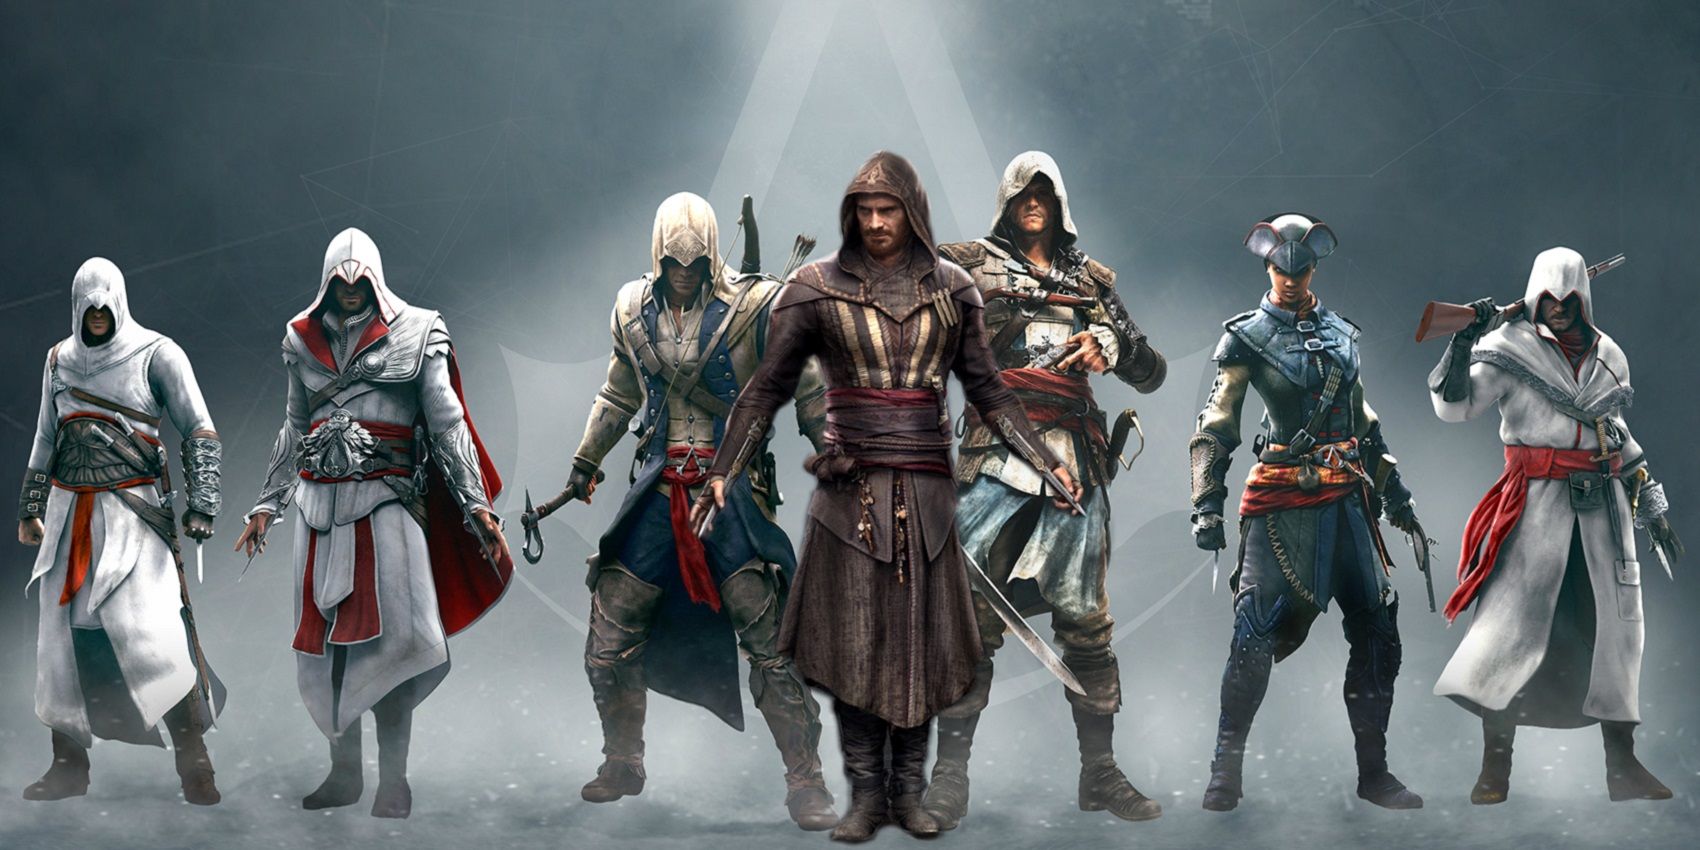 Assassins Creed - Aguilar with other Assassins